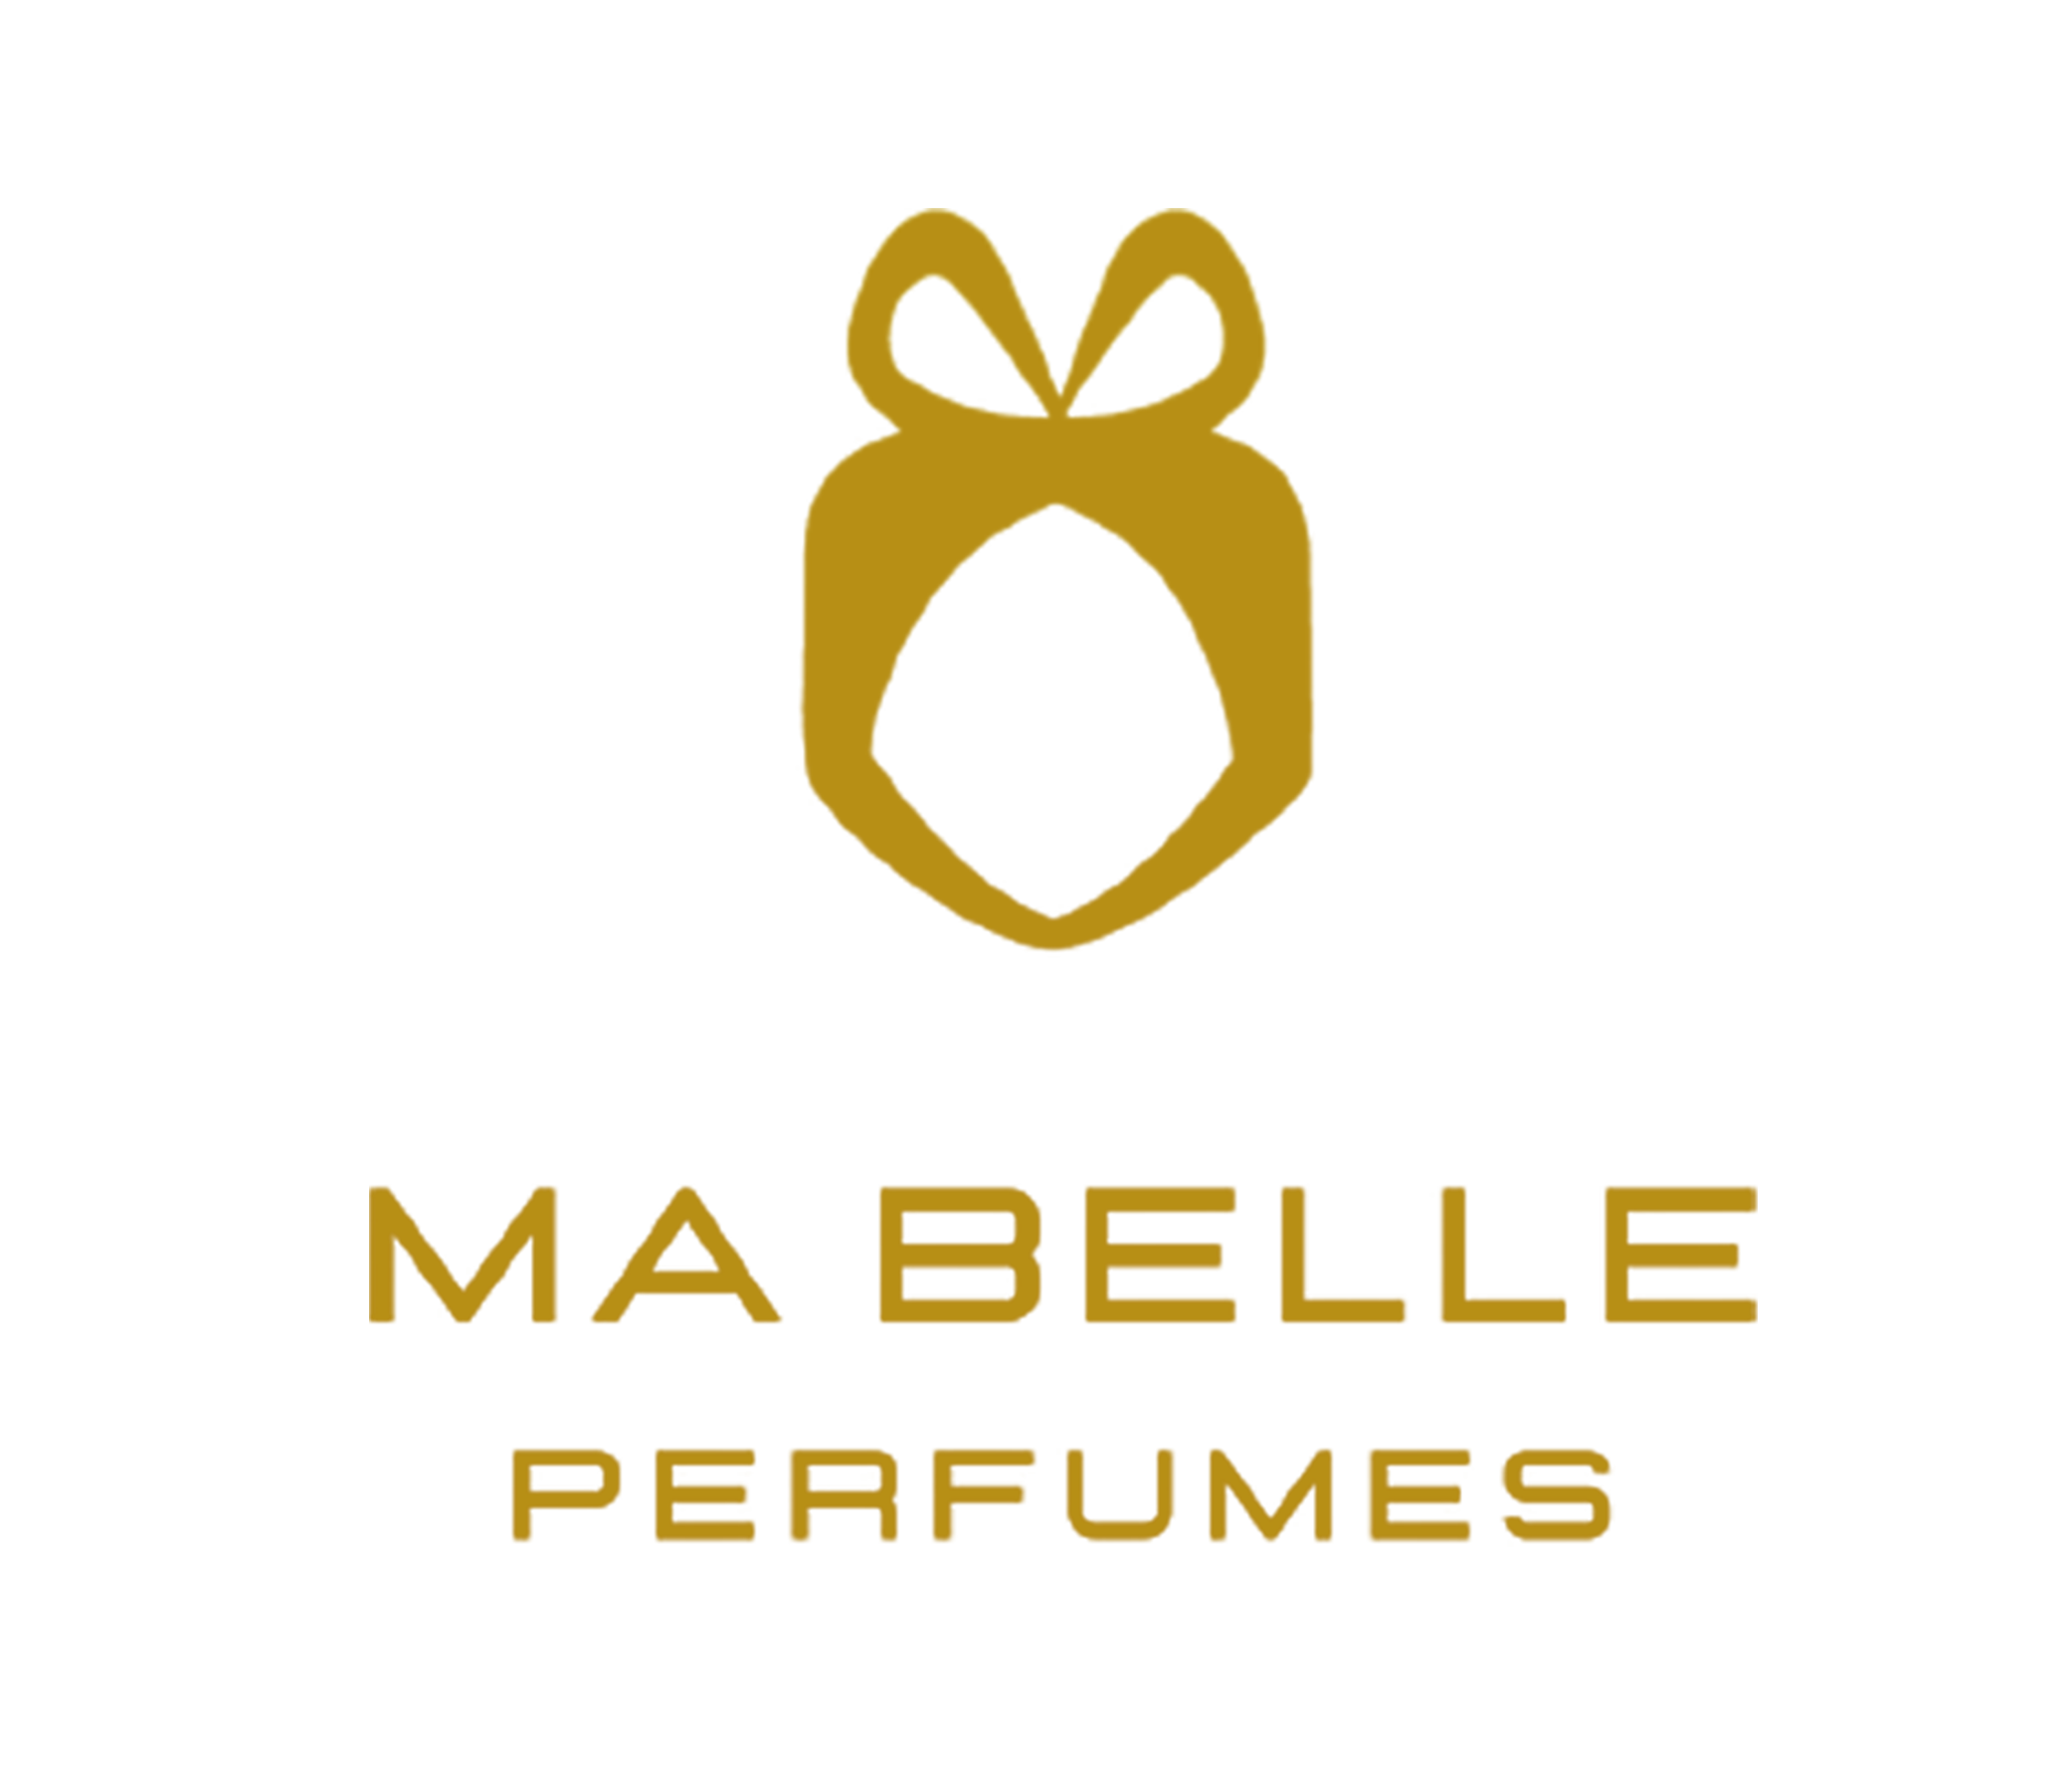 About us – Ma Belle Perfumes